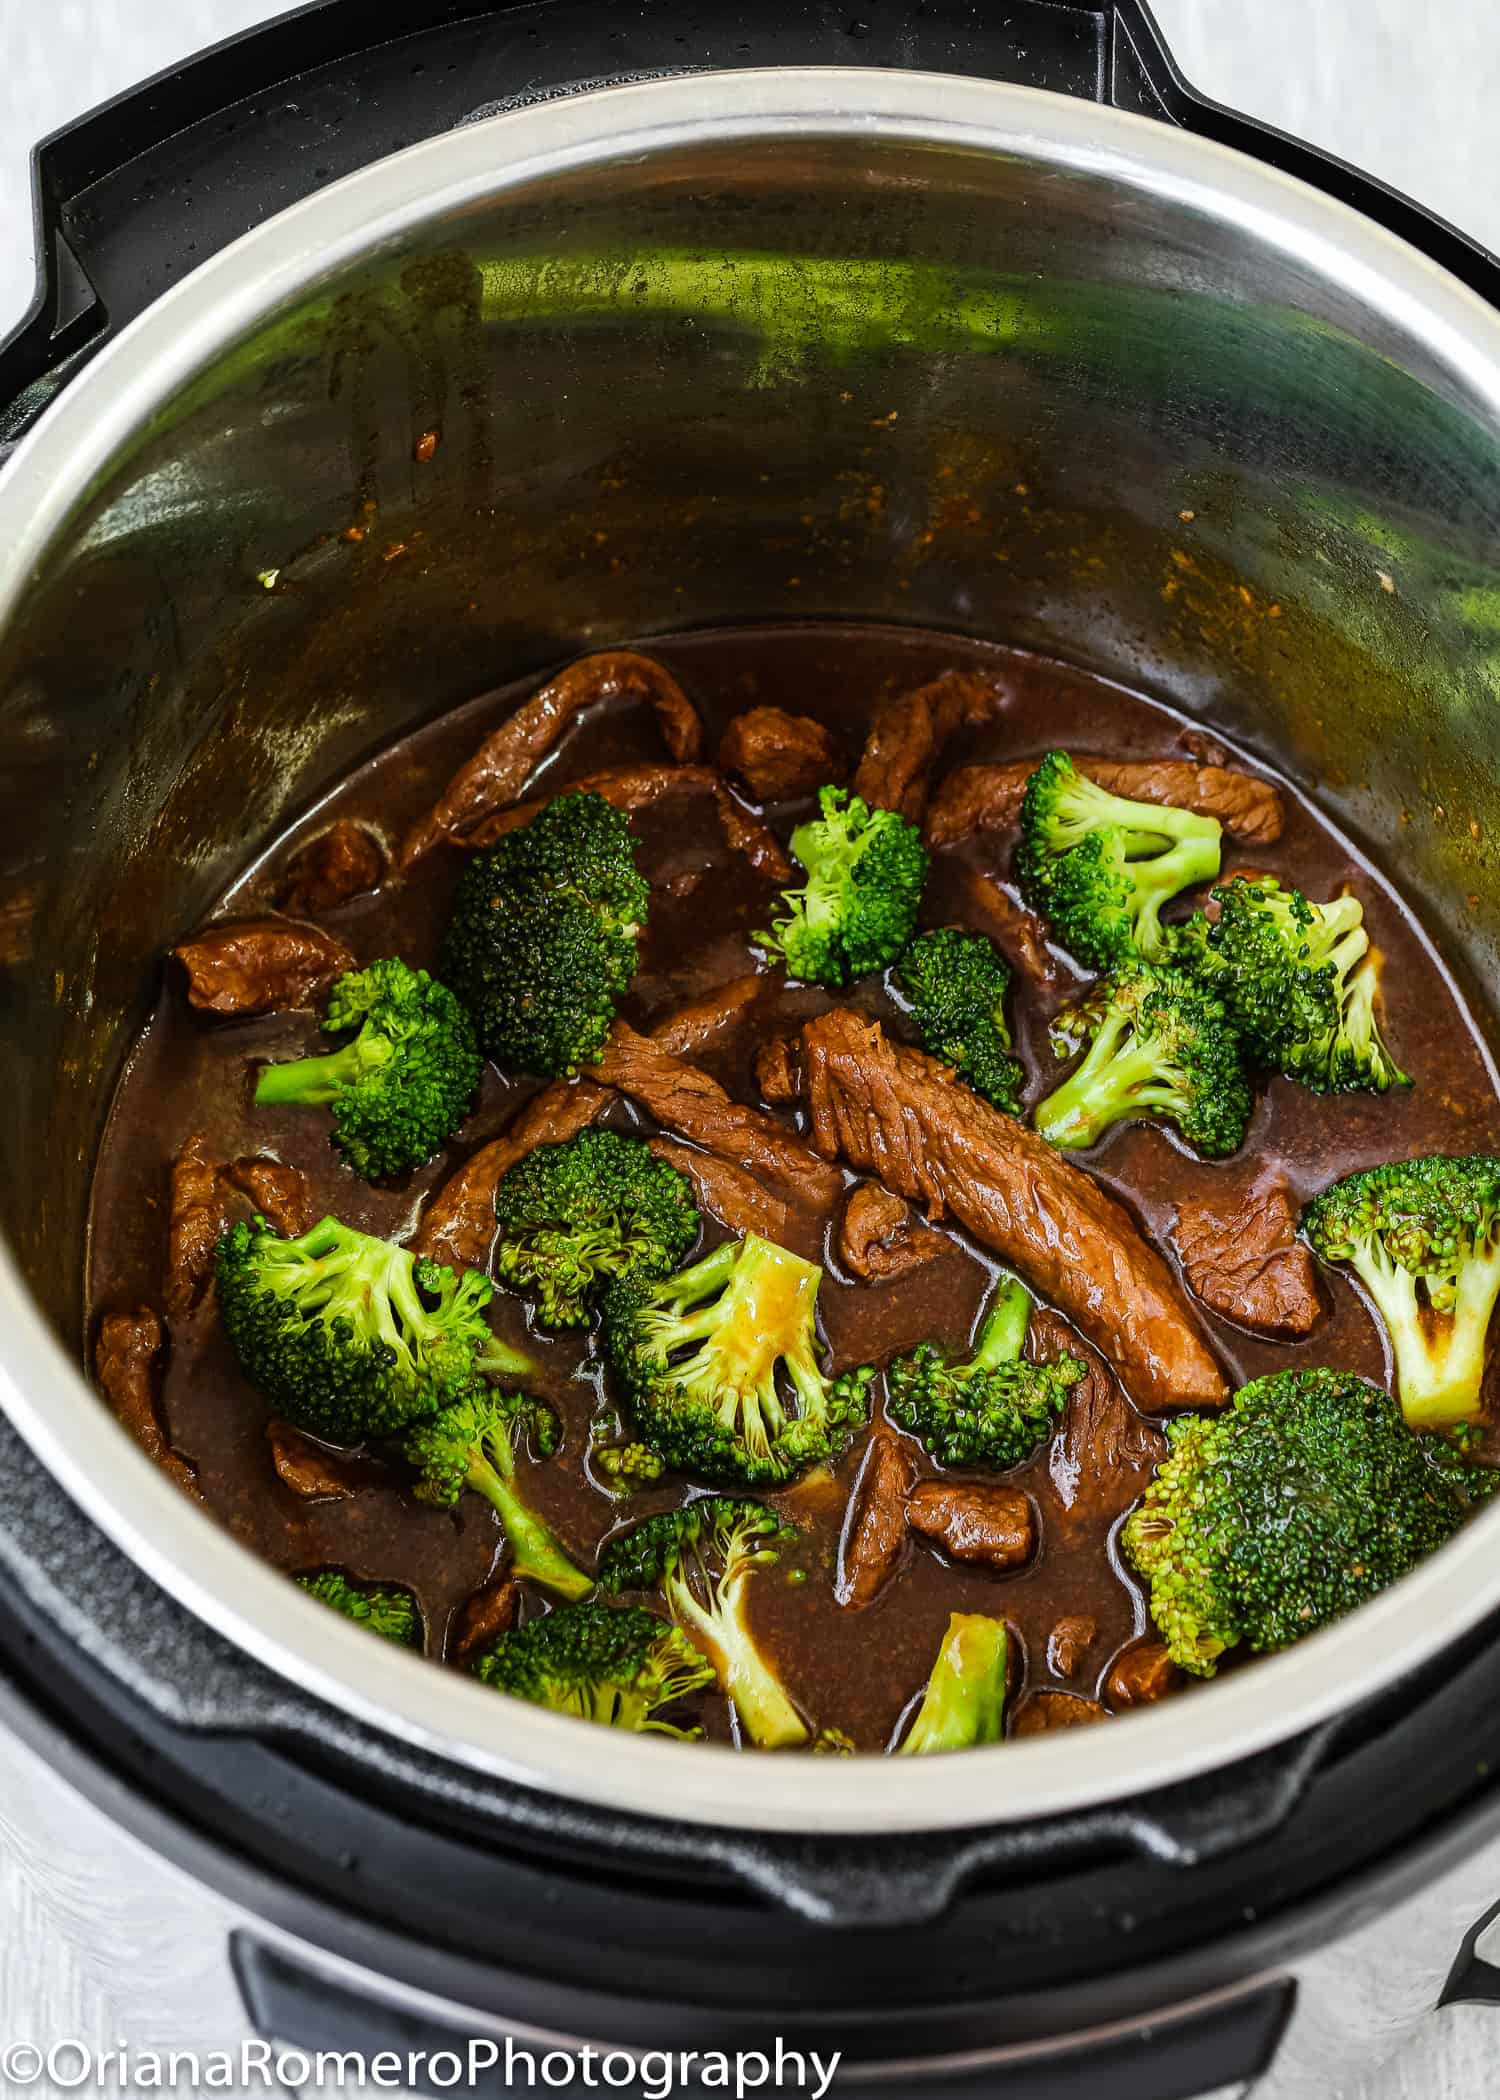 Beef and broccoli stir fry in an Instant Pot.